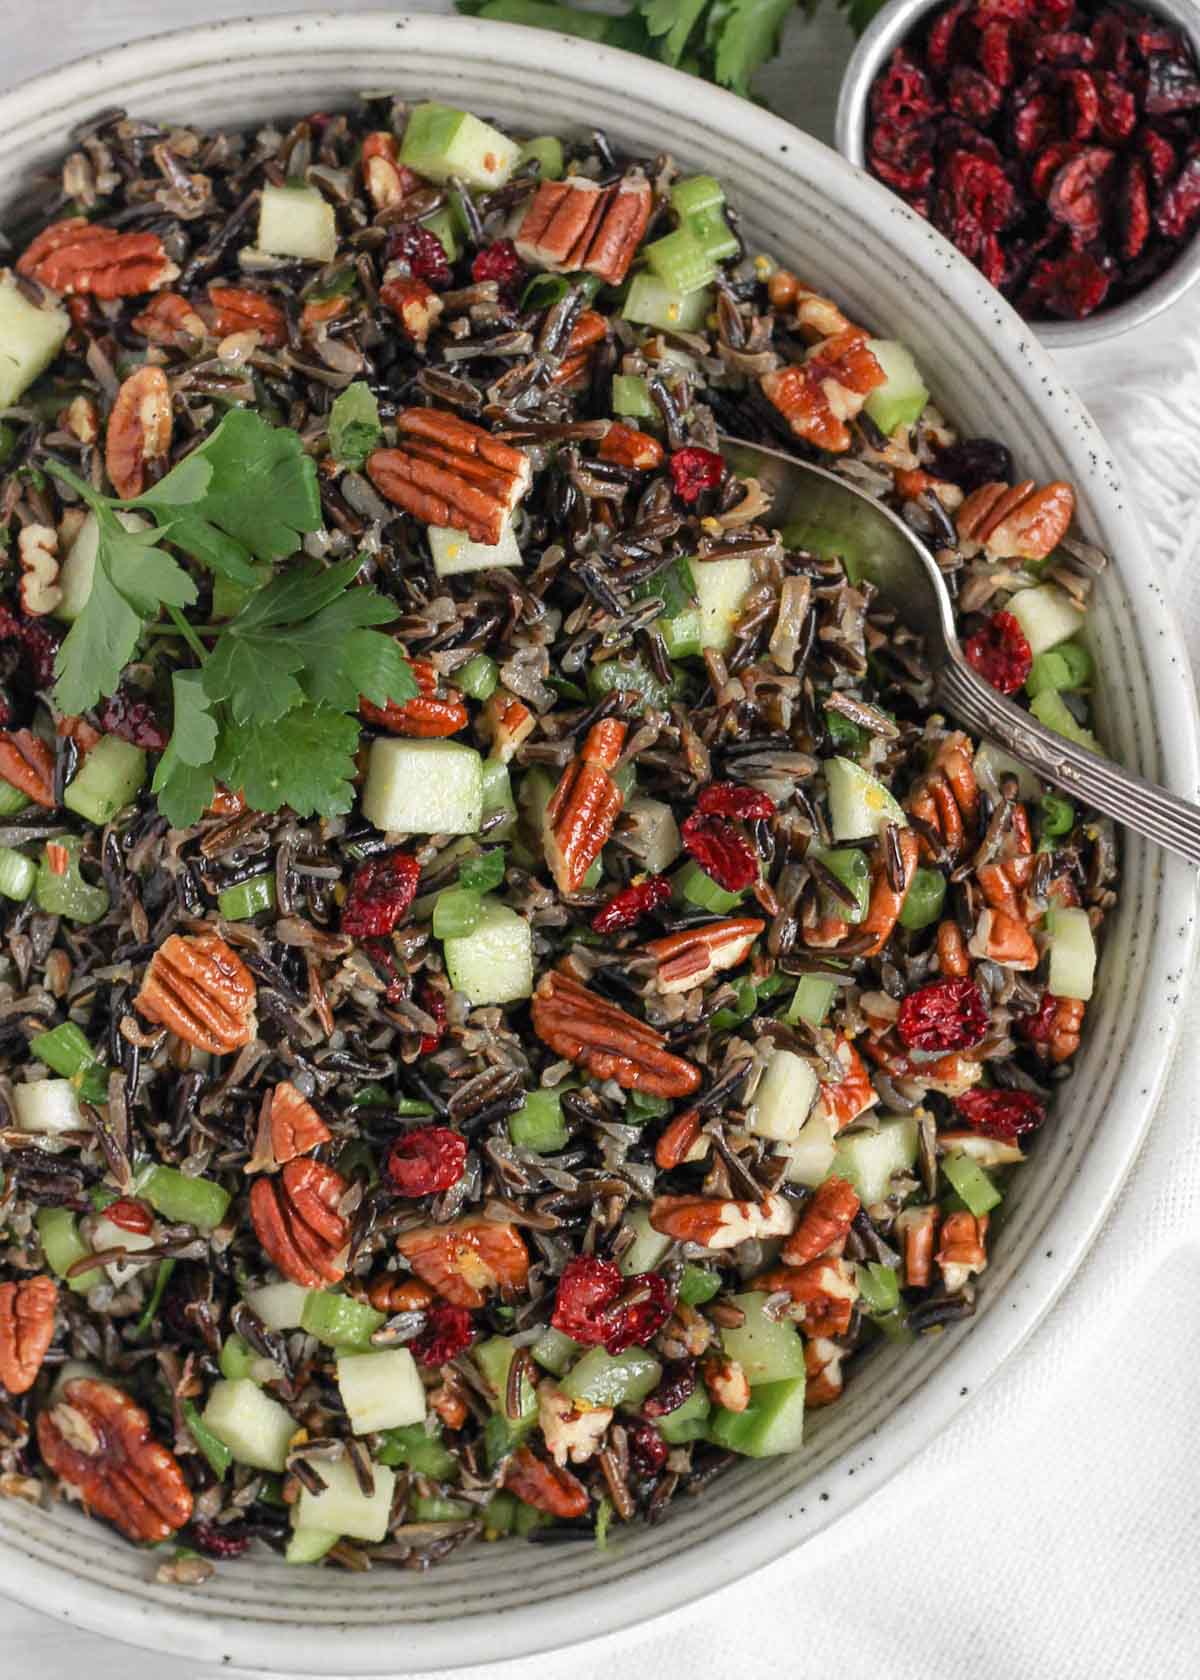 Wild rice salad in a ceramic serving bowl with a vintage serving spoon in the salad and a small dish of dried cranberries on the side.